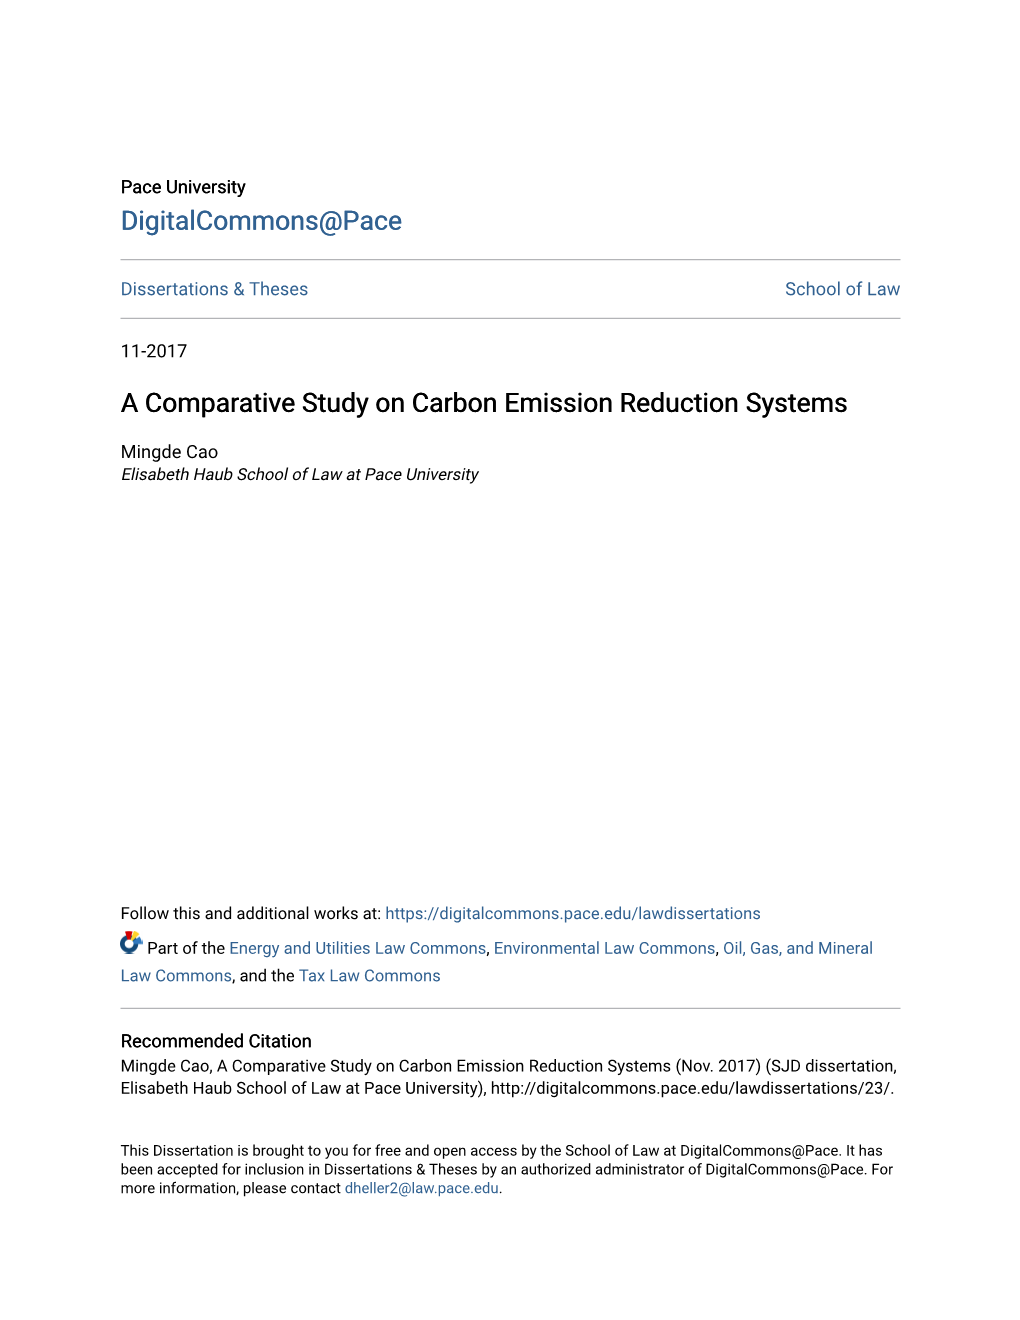 A Comparative Study on Carbon Emission Reduction Systems